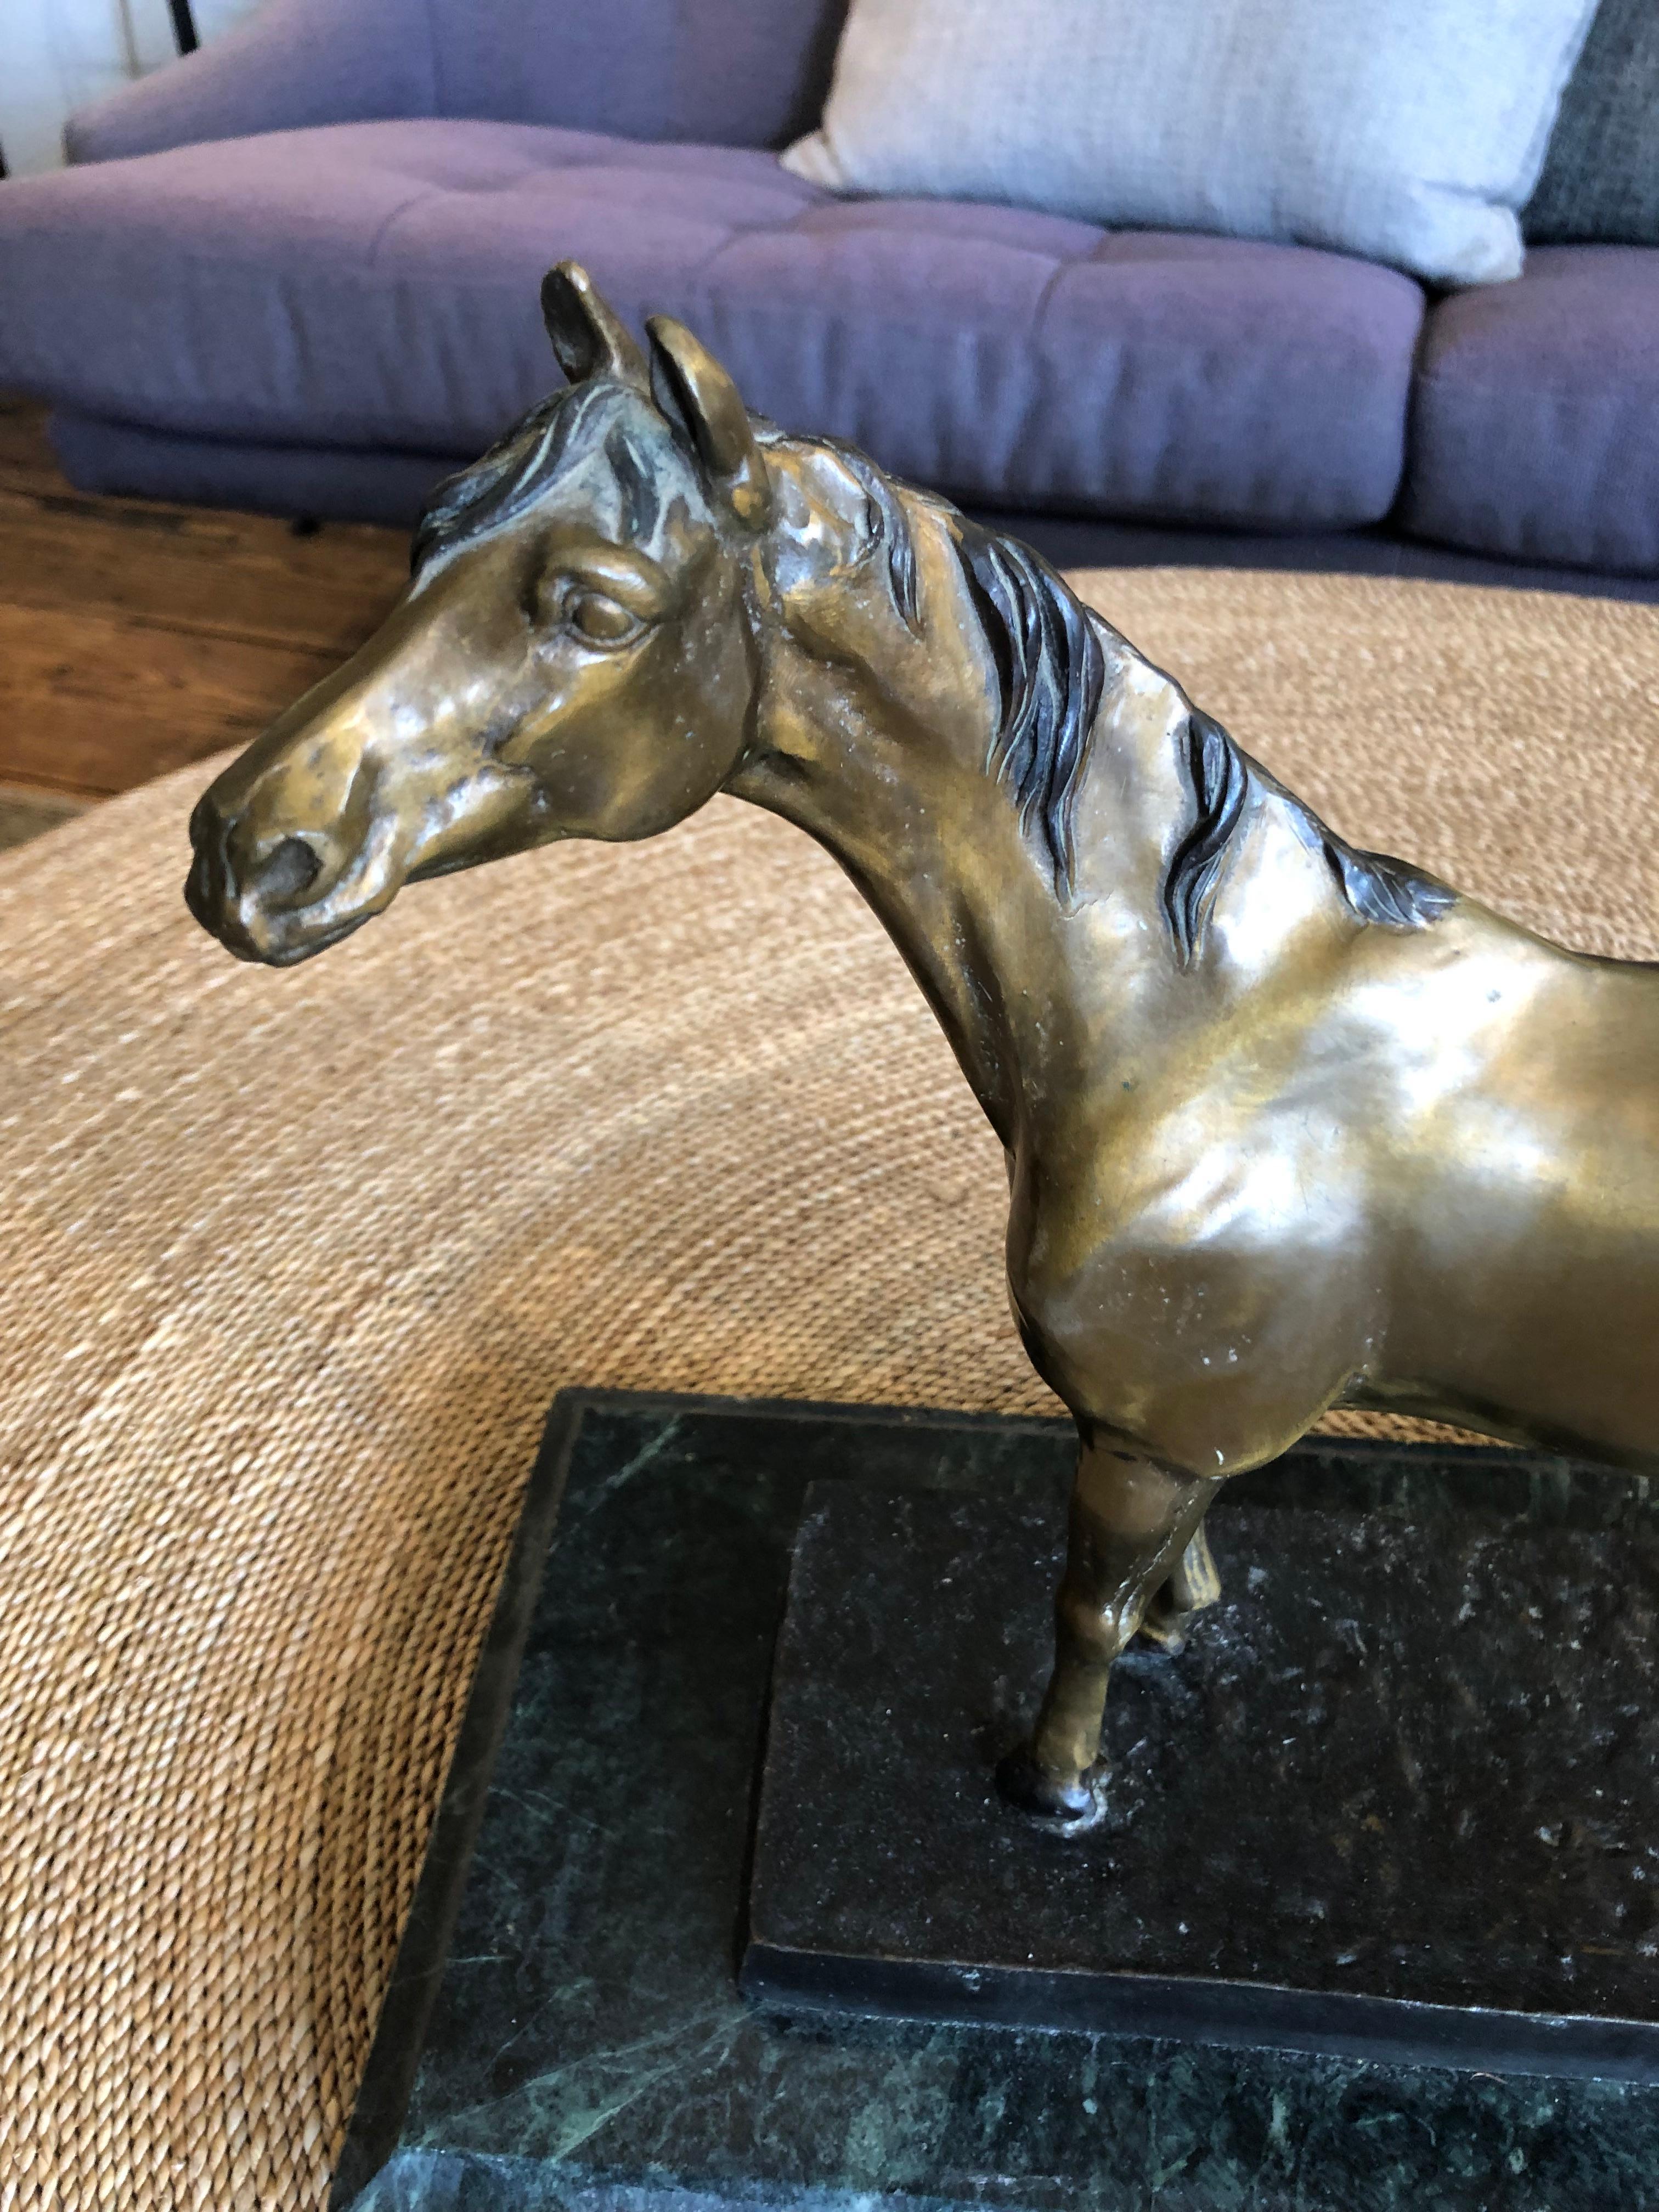 Gorgeous bronze sculpture of a horse mounted on marble by  Cyrus Dallin (1861-1944) , a celebrated Utah-born sculptor, educator, and Indigenous rights advocate who lived and worked in Arlington, Massachusetts for over 40 years. Dallin’s public